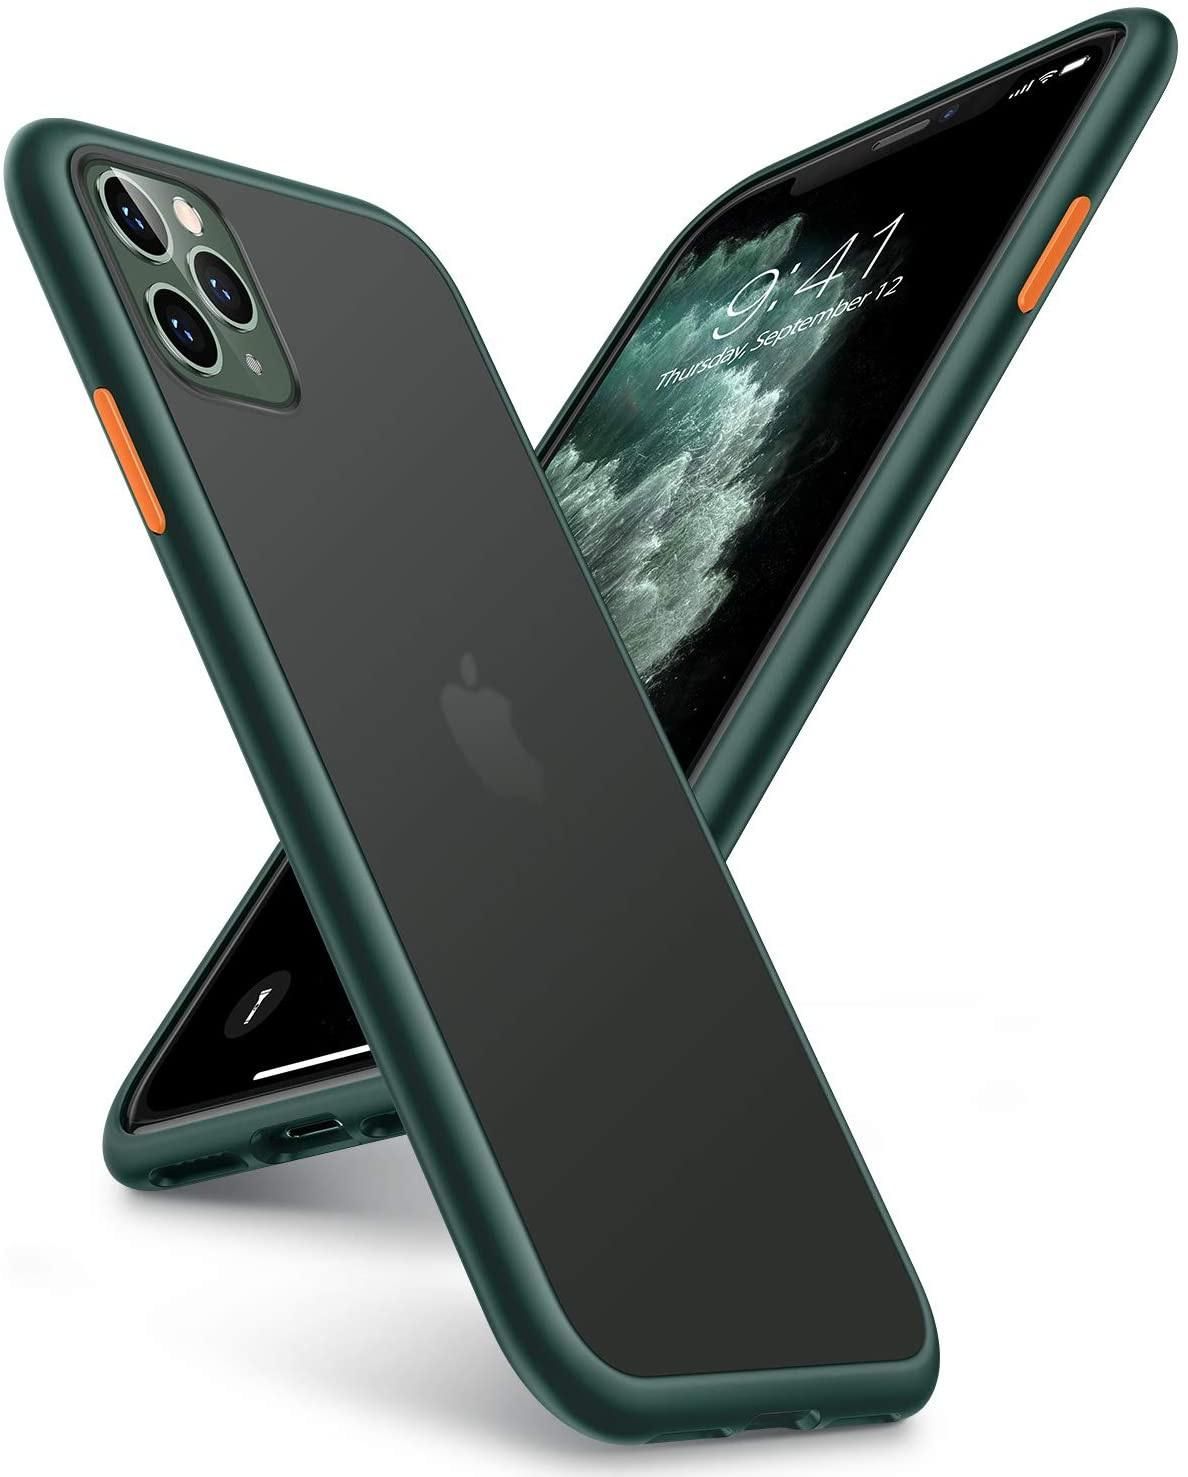 torras shockproof case for iPhone 11 Pro